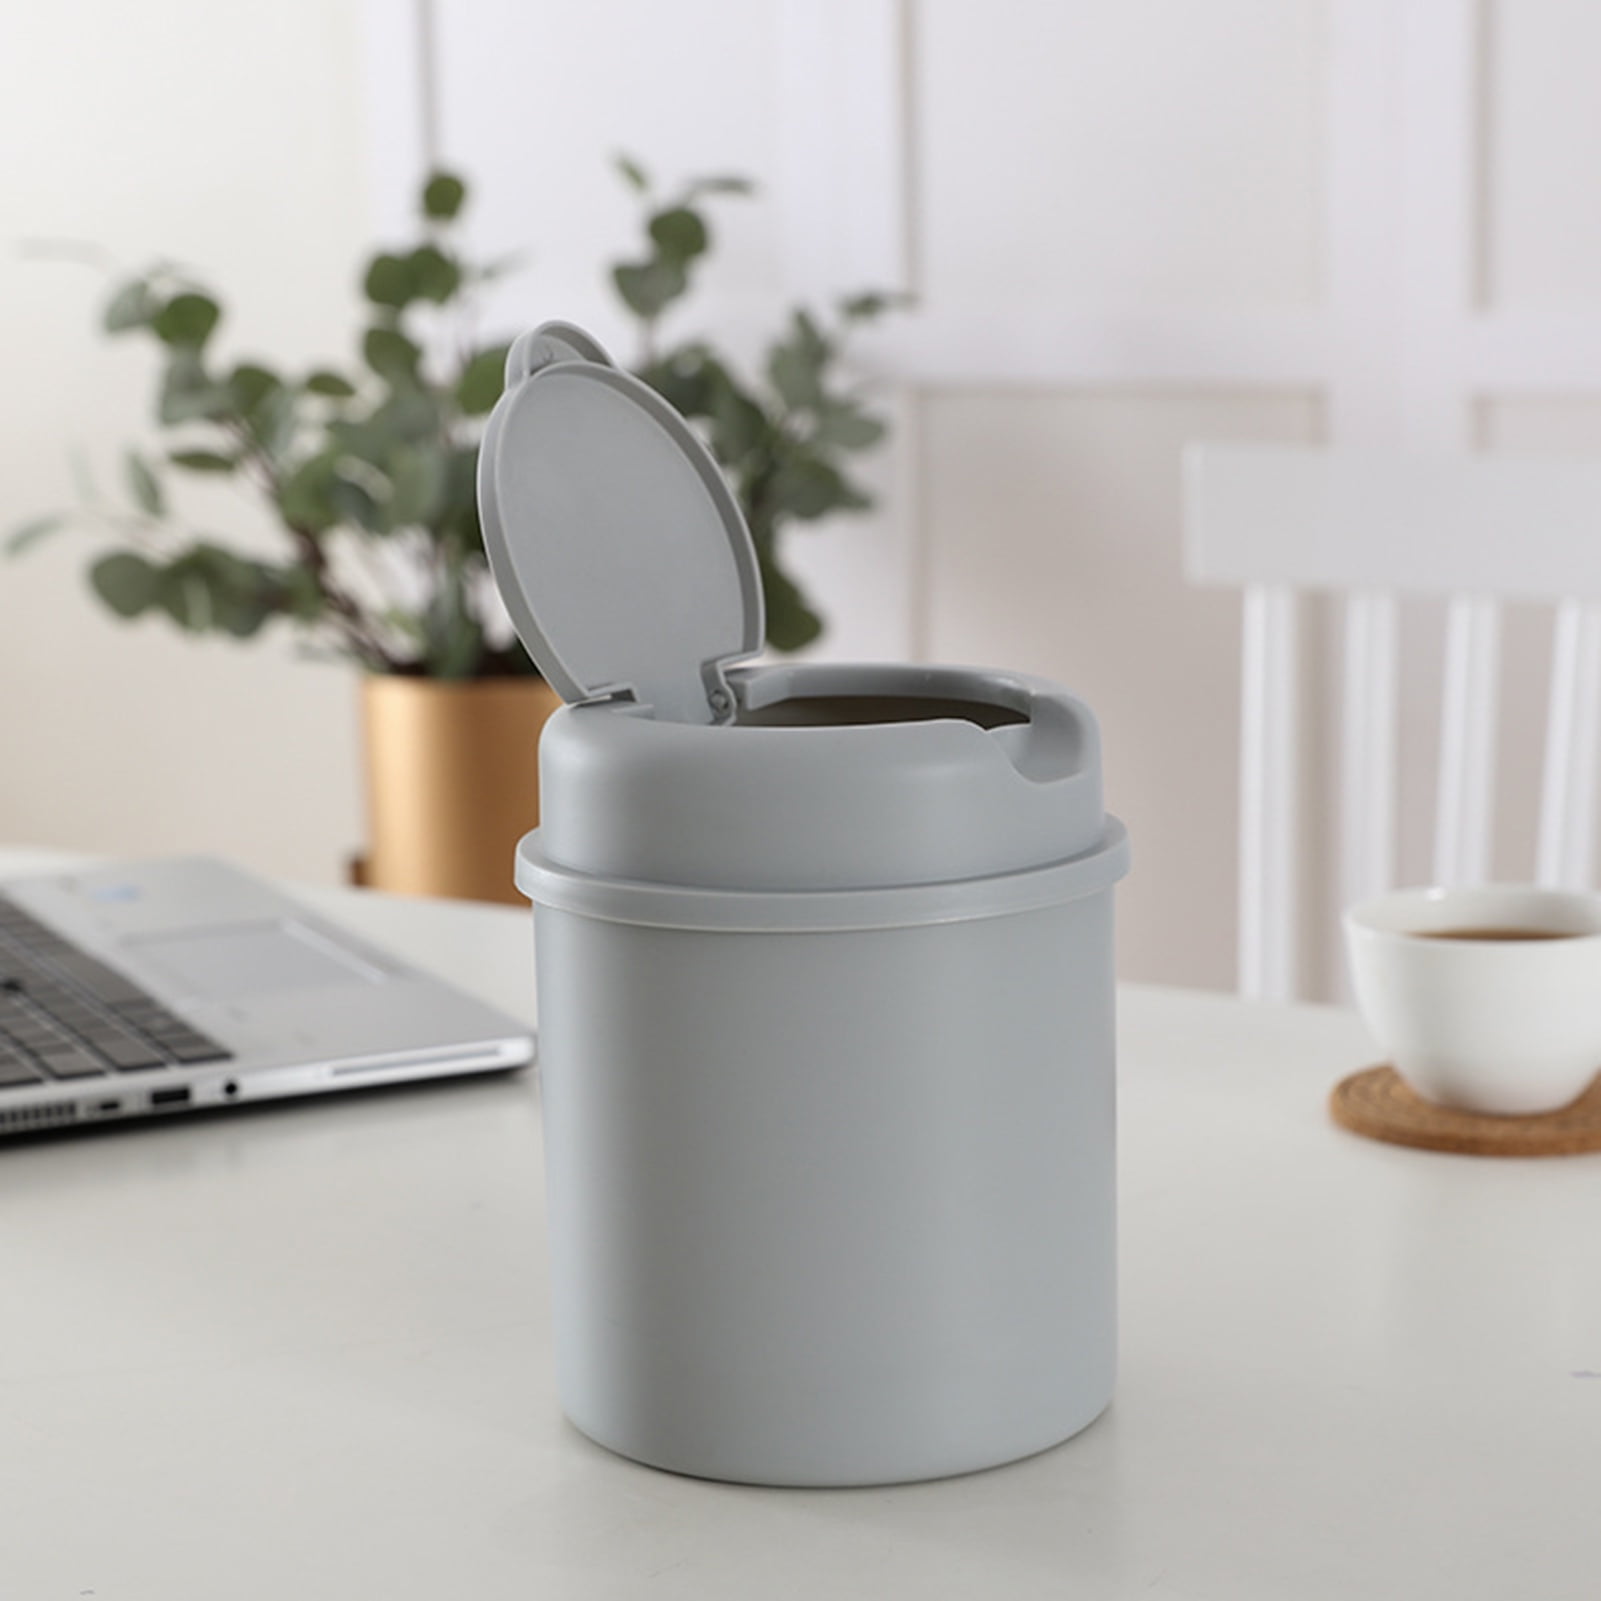 Travelwant Mini Trash Can with Lid, Press-Type with Removable